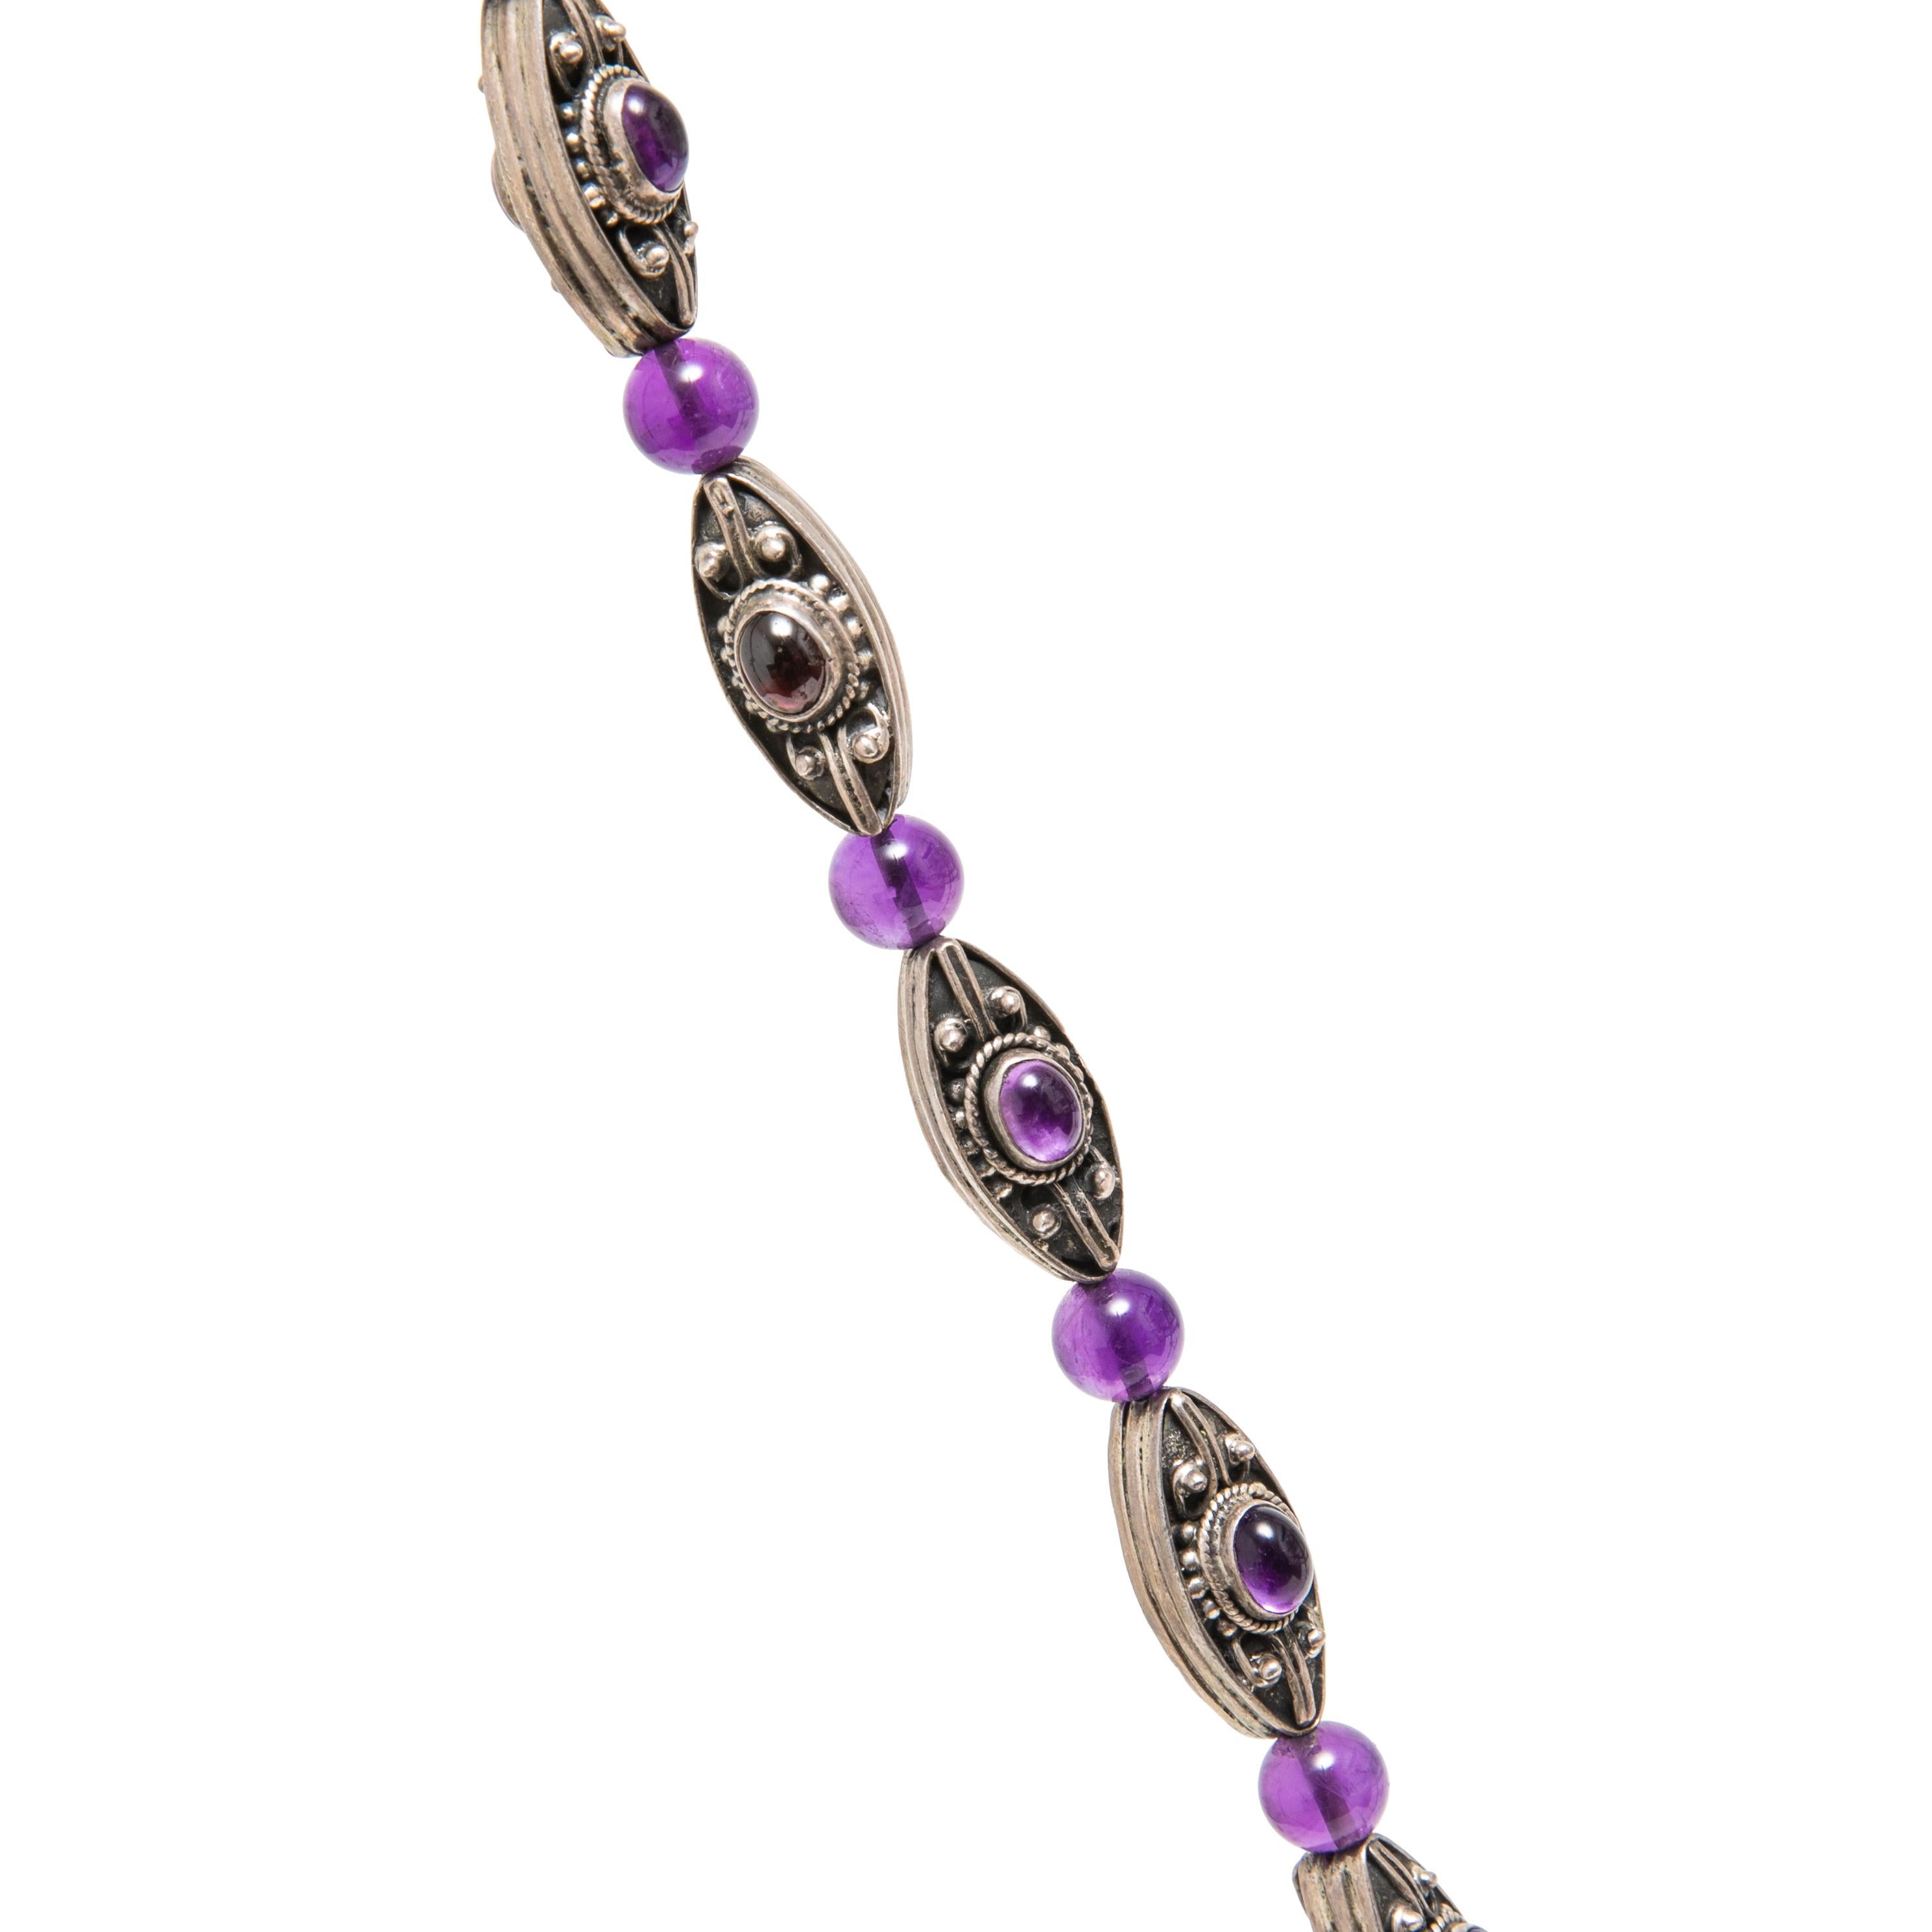 Oval Cut Silver and Amethyst Oval Cabochon and Beads Necklace